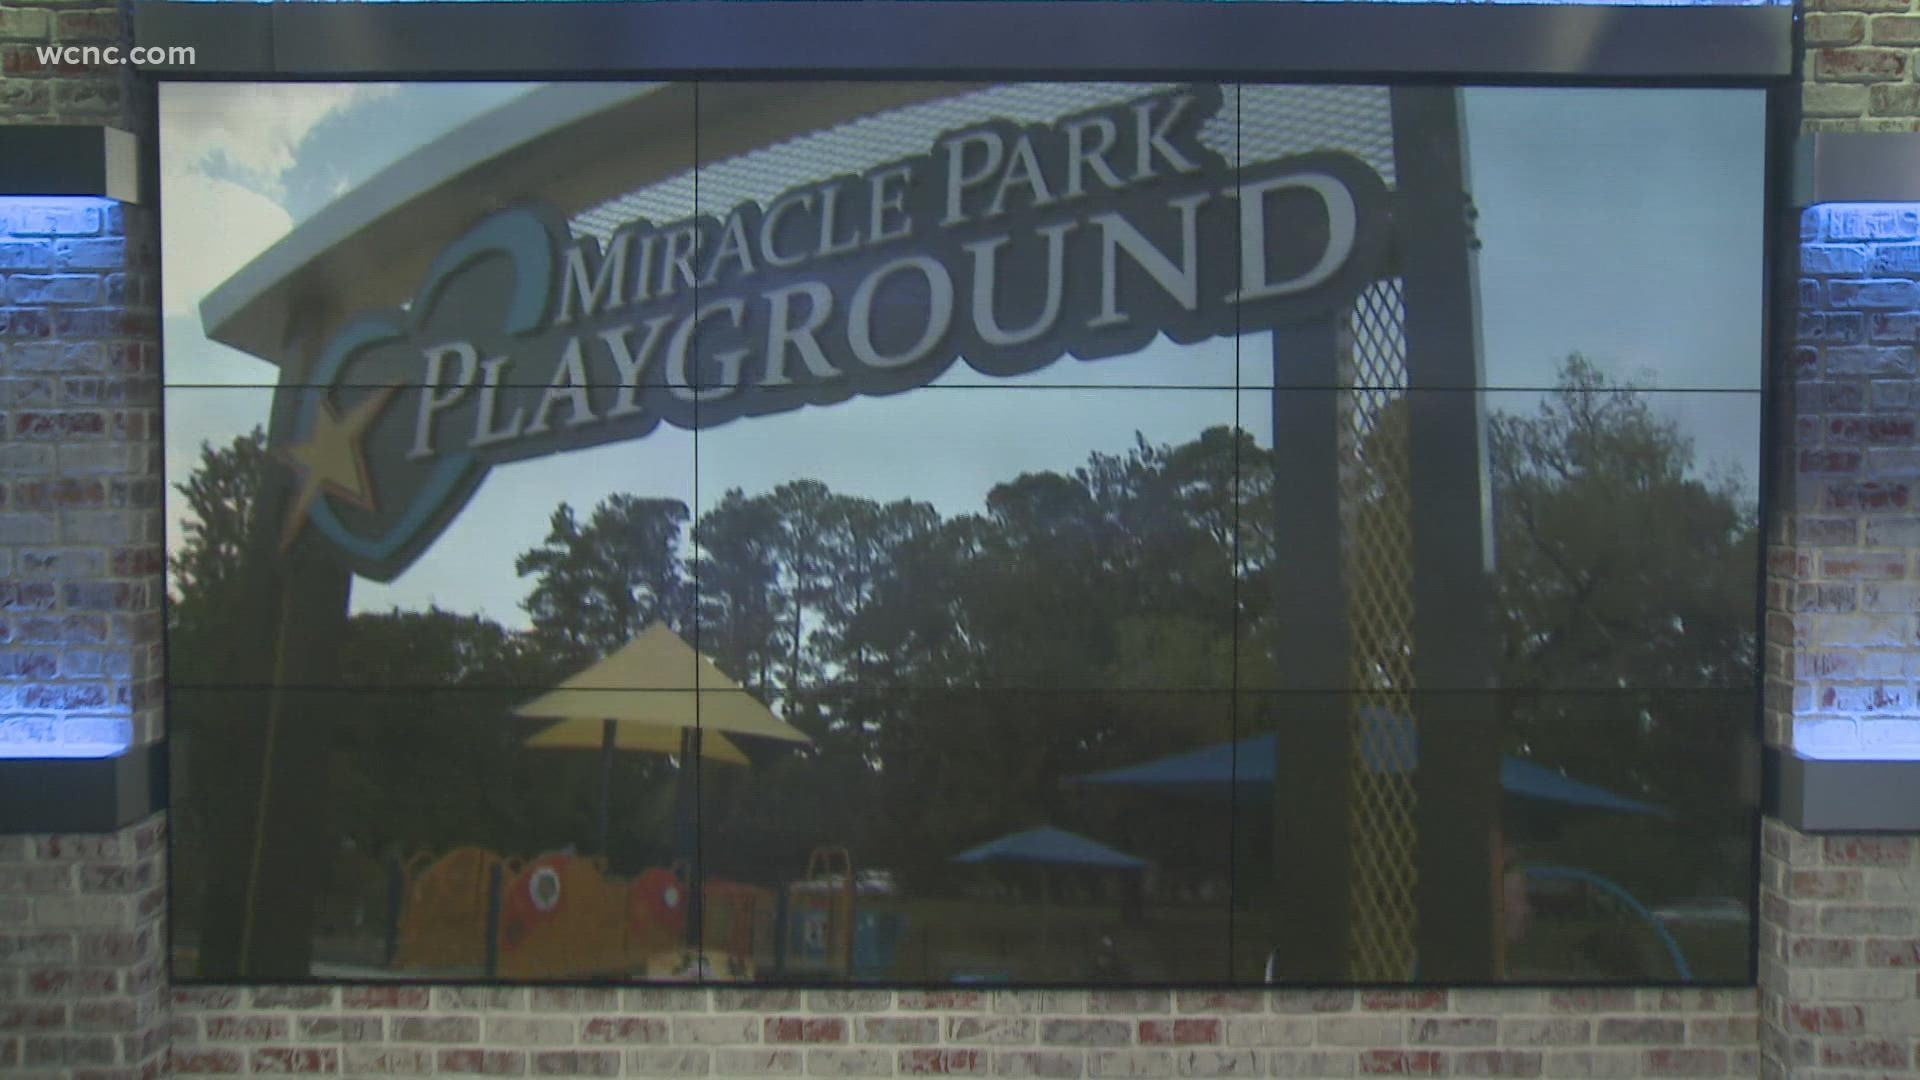 Will you check out Miracle Park Playground?